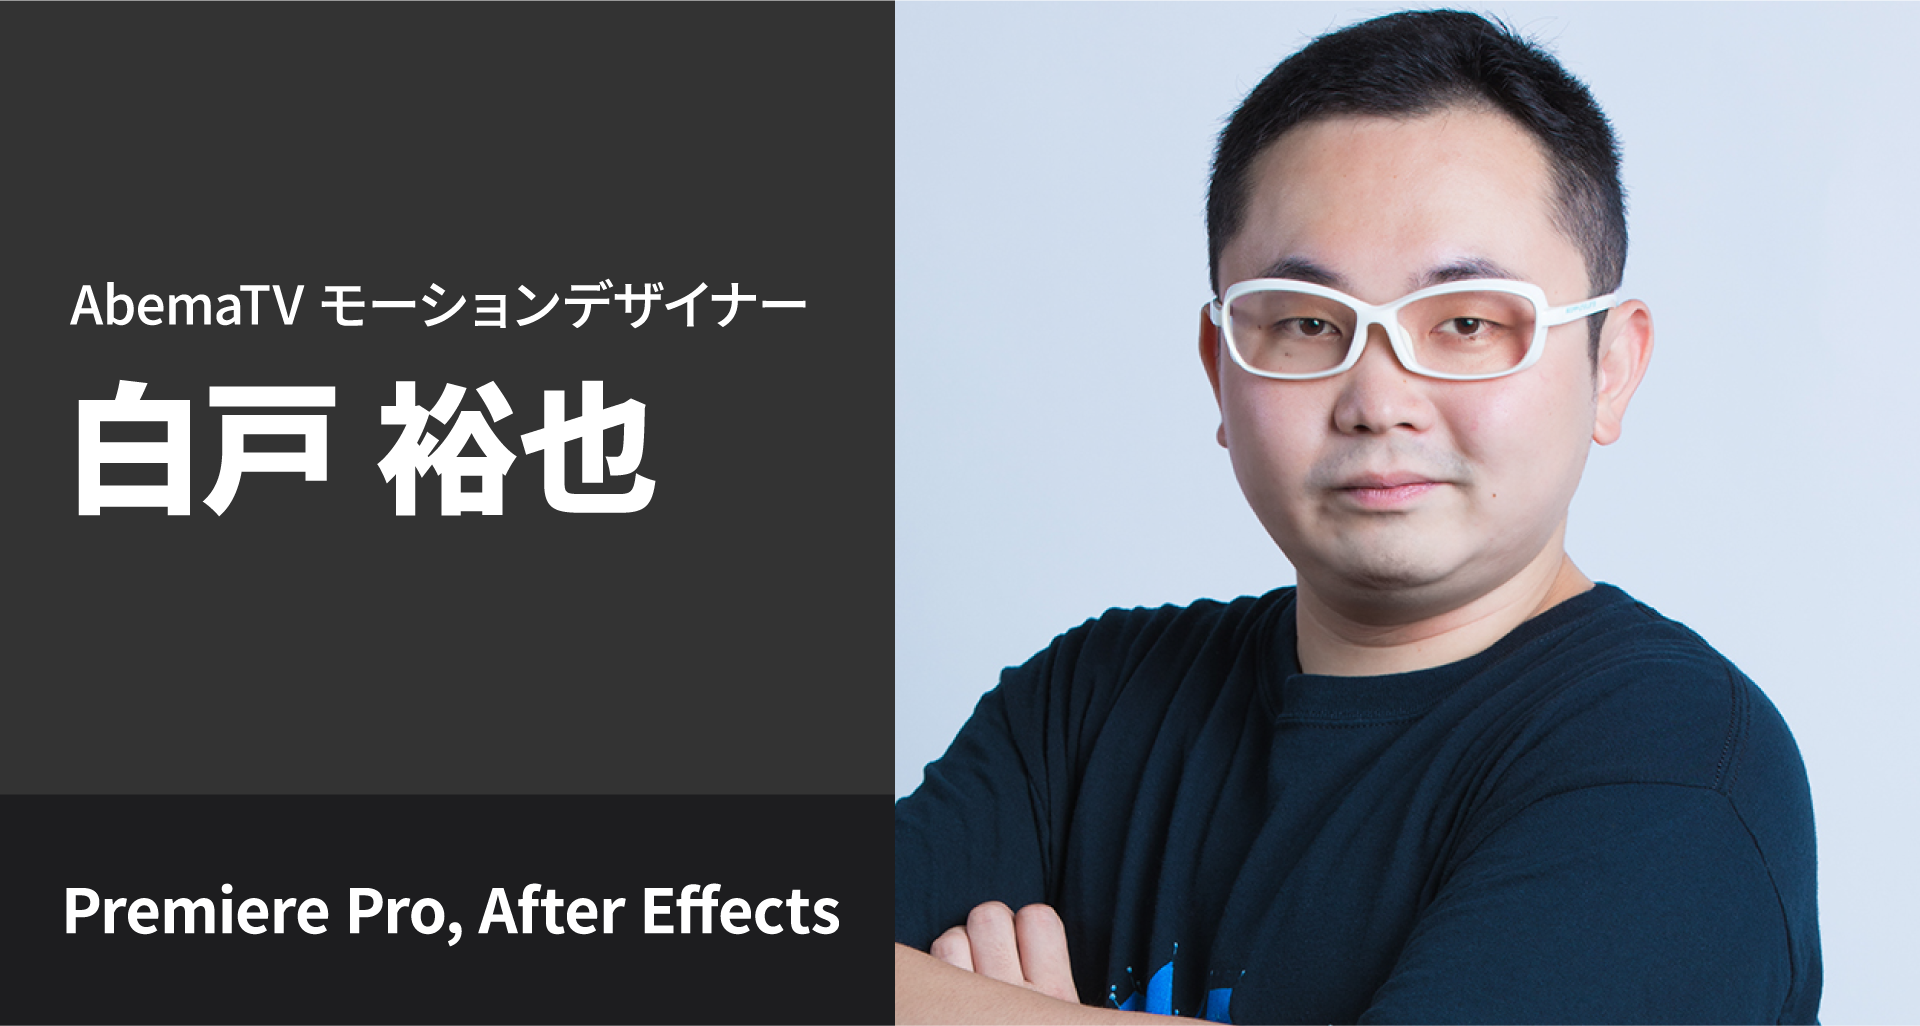 adobe_after_effects